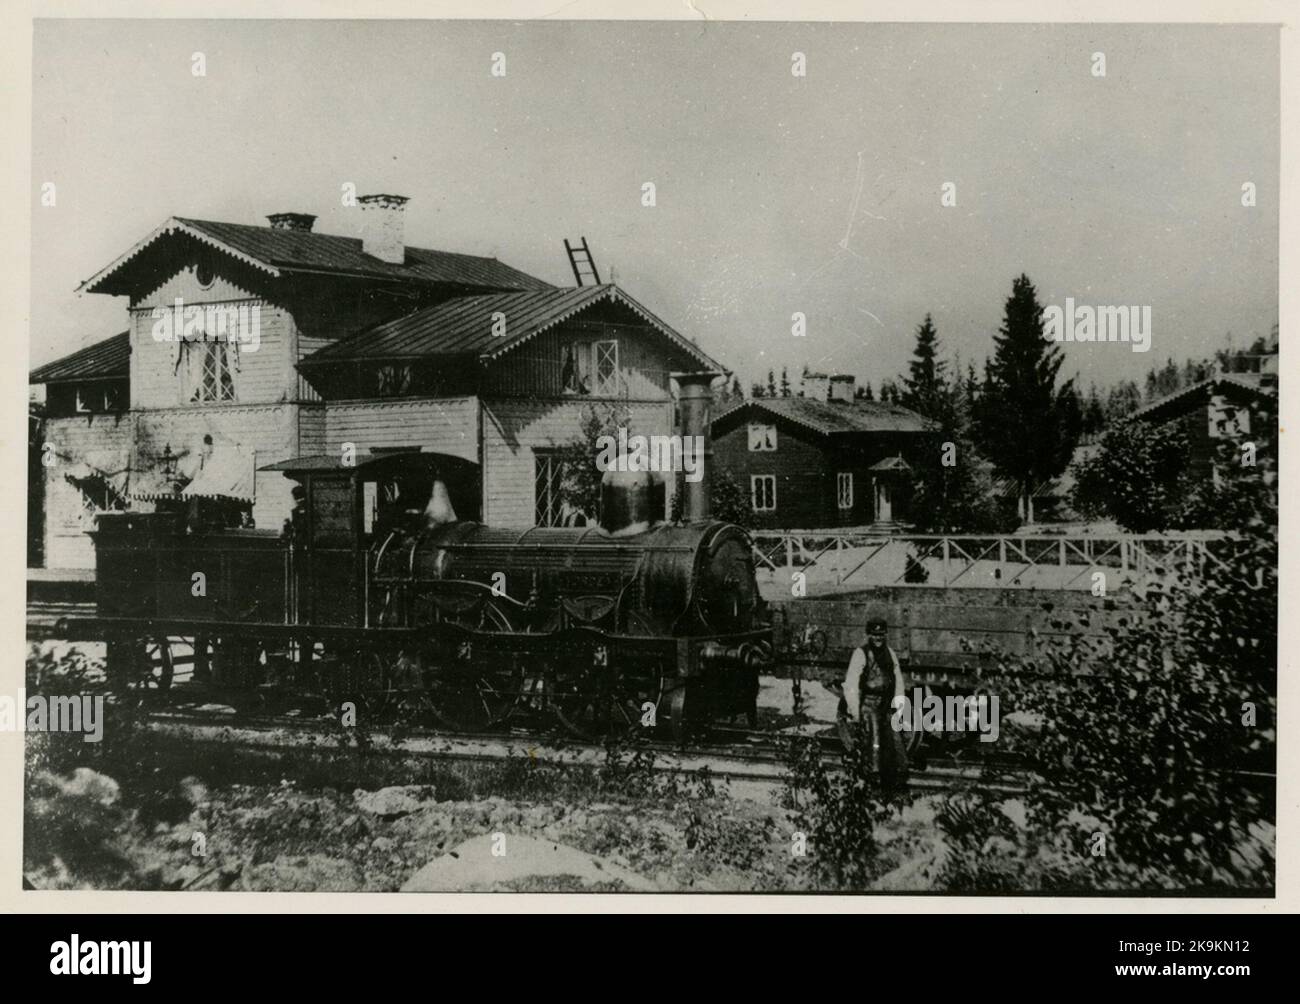 Robertsholm station before the name change to Hofors. In front of the station house is the Gävle-Dala Railway steam locomotive GDJ Lok 4 'Norden', and station man Olof Wallström, born 1836, died 26/6 1884. Employed 1/5 1861. Stock Photo